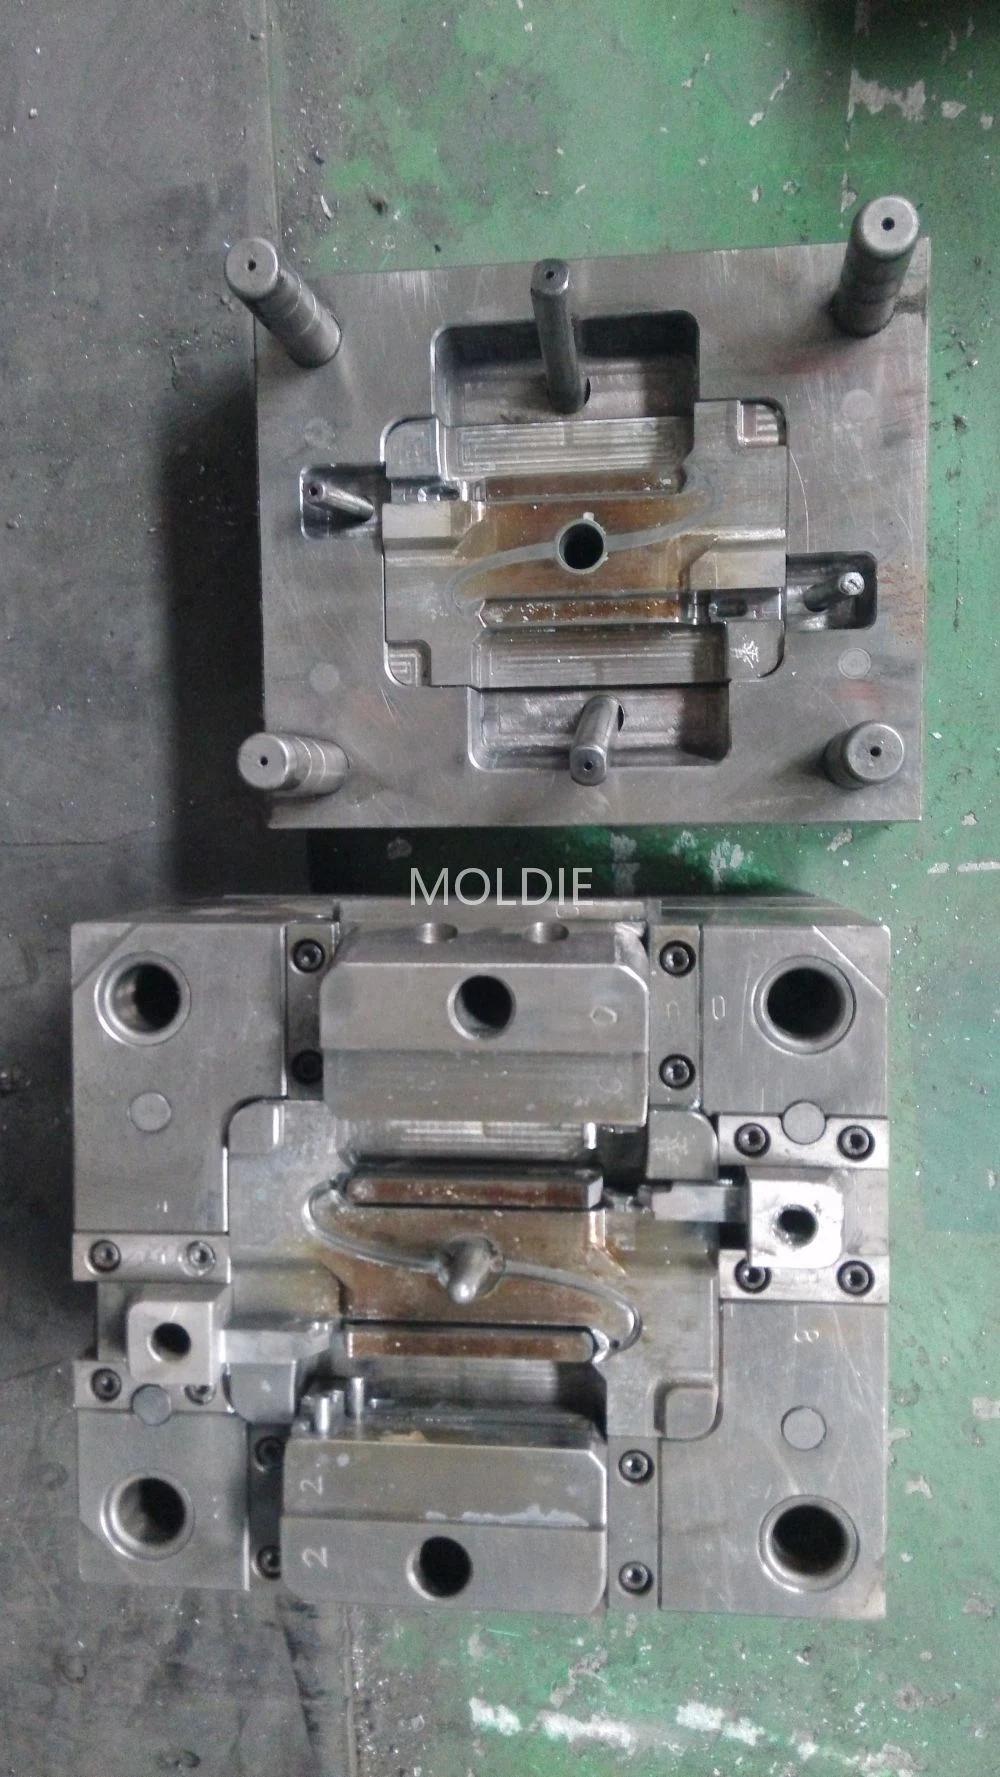 Customized/Designing Plastic Injection Mould for Electric Front Cover Parts